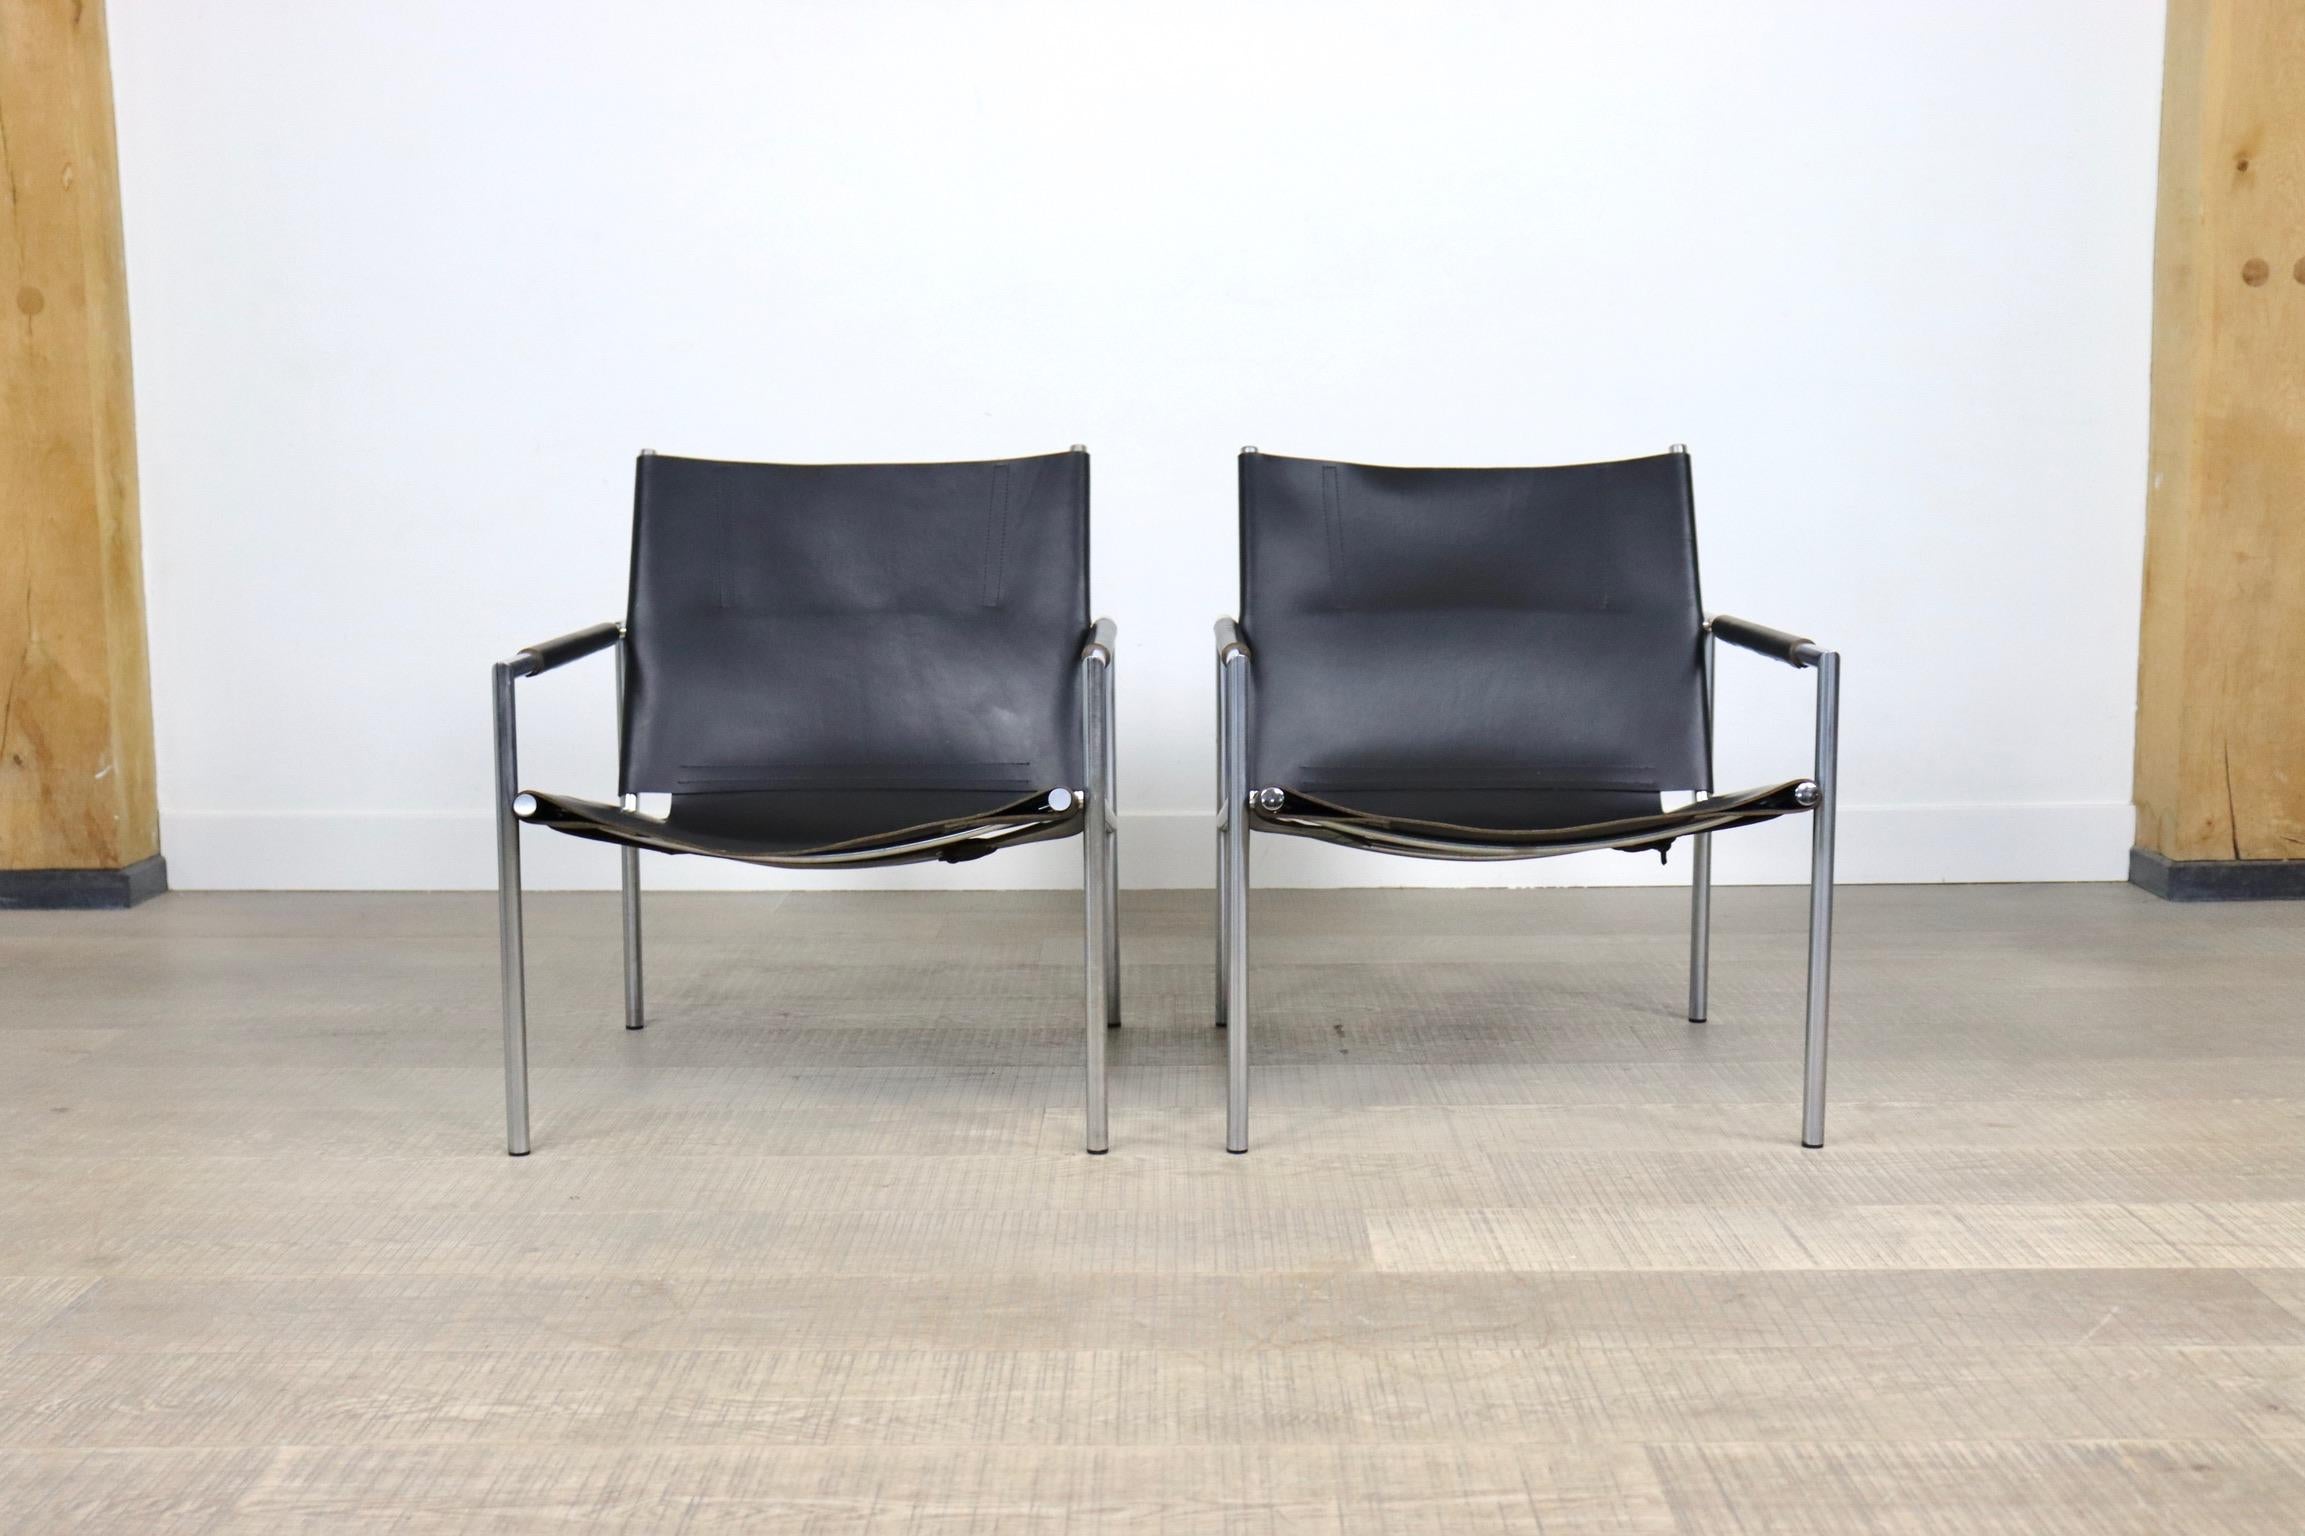 Very nice SZ02 easy chairs designed by Martin Visser and manufactured by ‘t Spectrum, Netherlands 1965. The chair has a stainless steel tubular metal frame and very nice thick saddle leather seat and back for comfort. Stunning minimalistic design